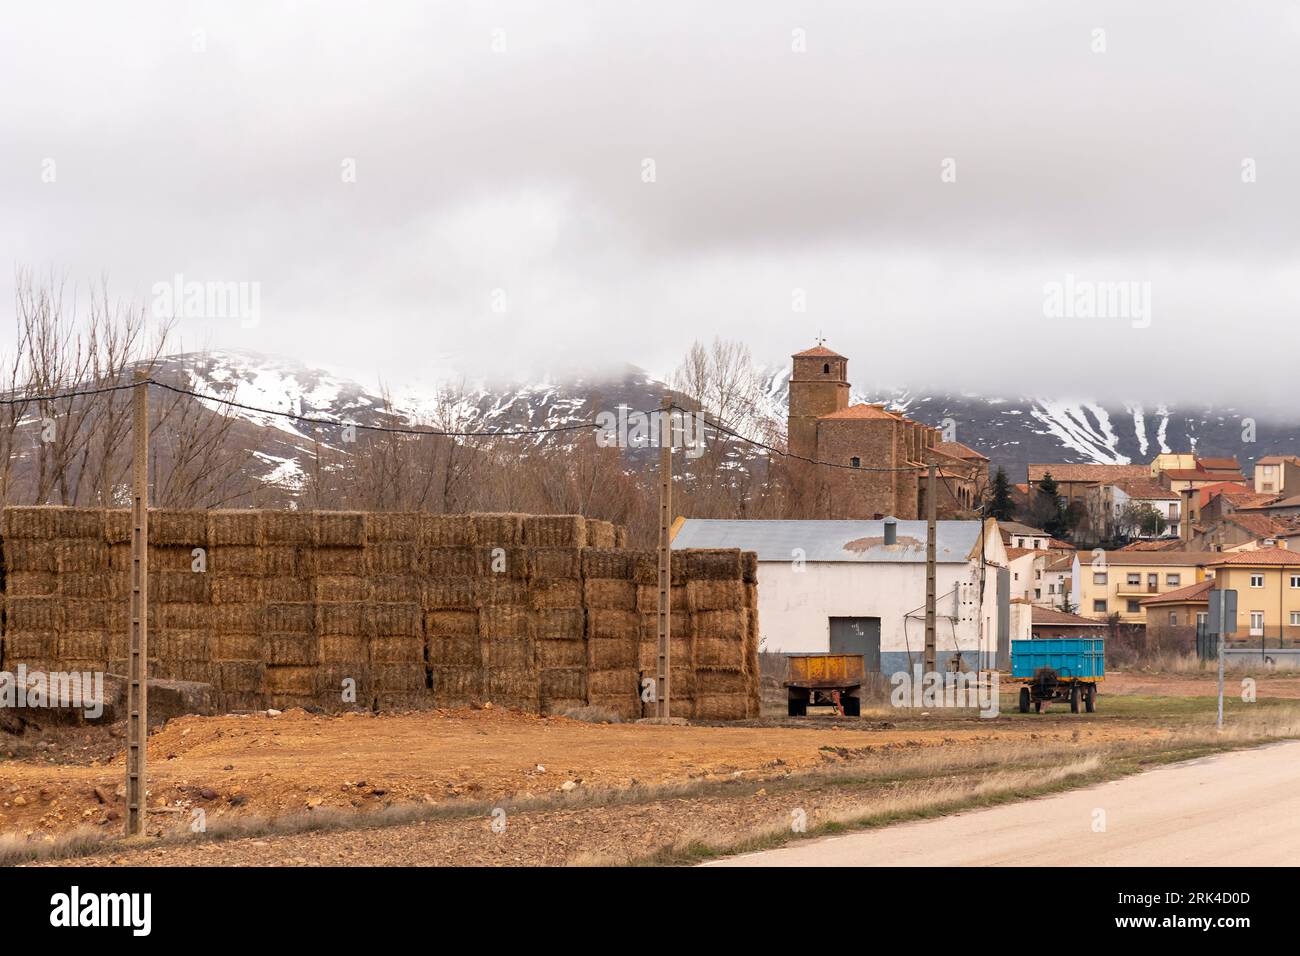 Discover the breathtaking beauty of Borobia, Soria with this stunning panoramic photograph featuring snow-capped Moncayo mountain and charming alpaca Stock Photo